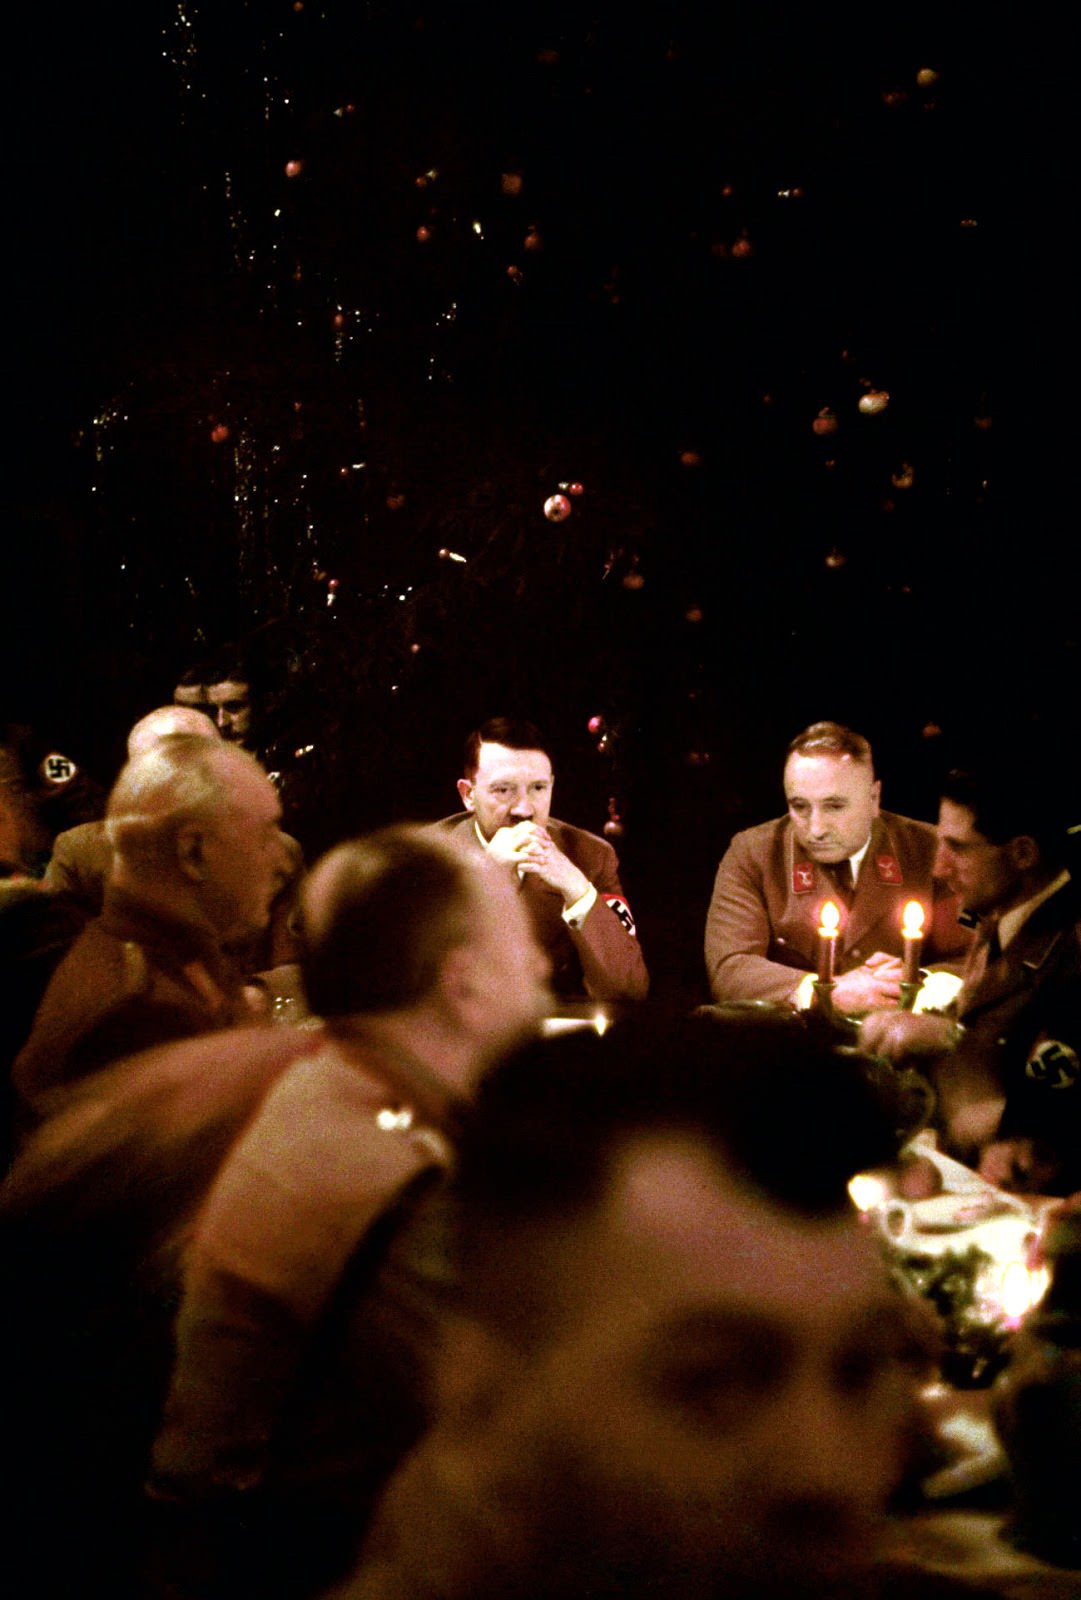 Hitler (center left) appears ill at ease at the Christmas party